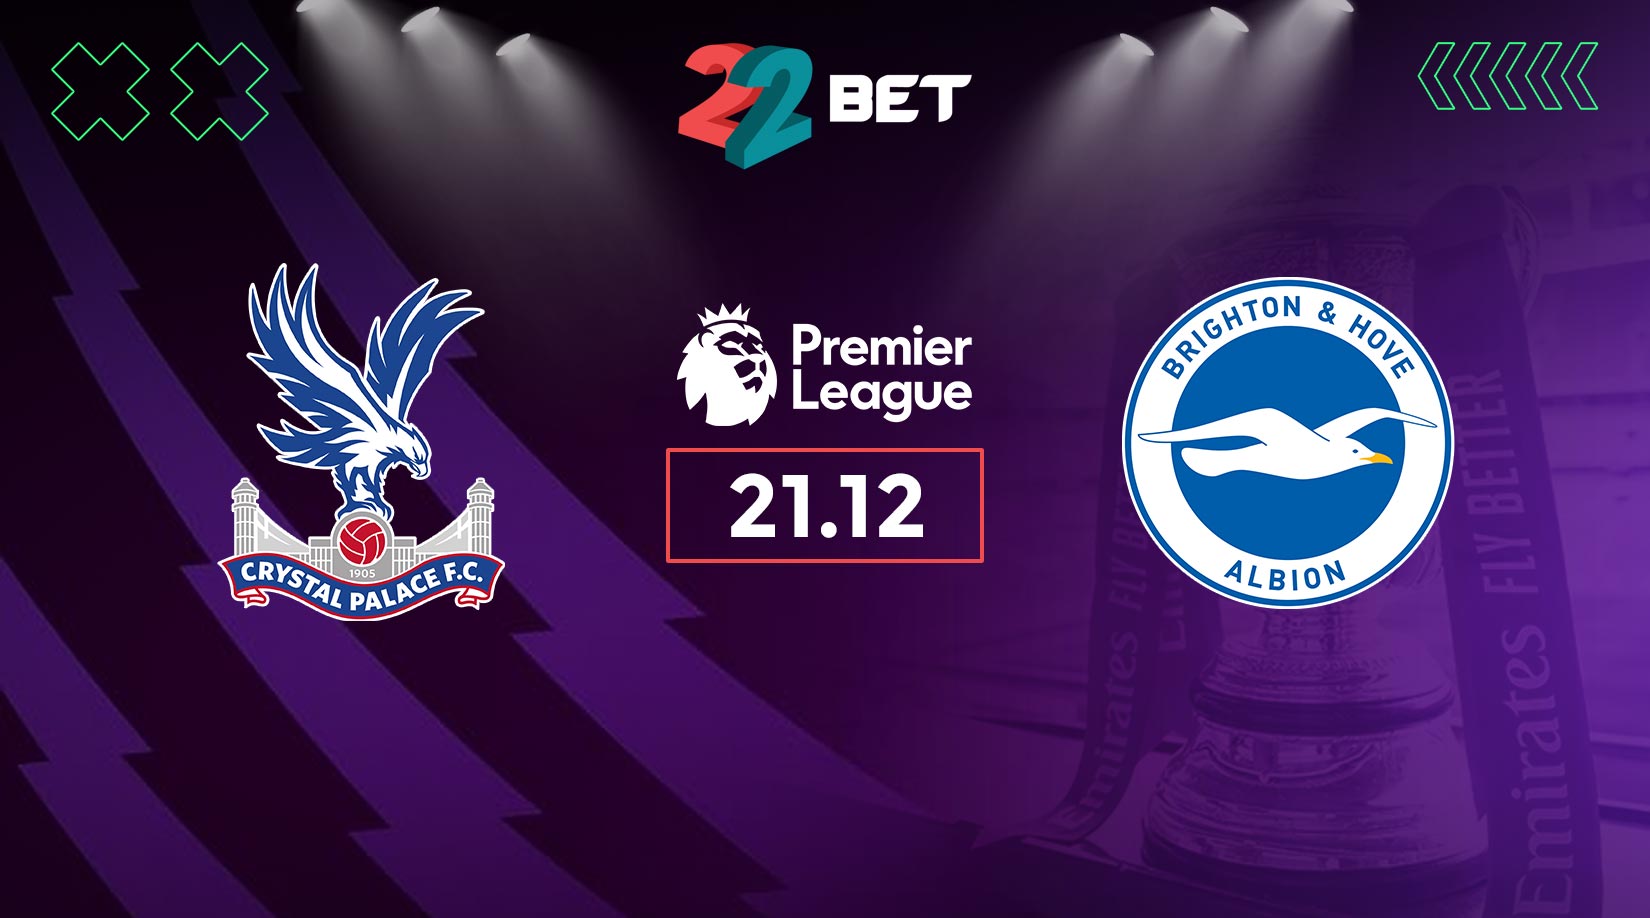 Crystal Palace vs Brighton & Hove Albion Prediction: Premier League Match on 21.12.2023